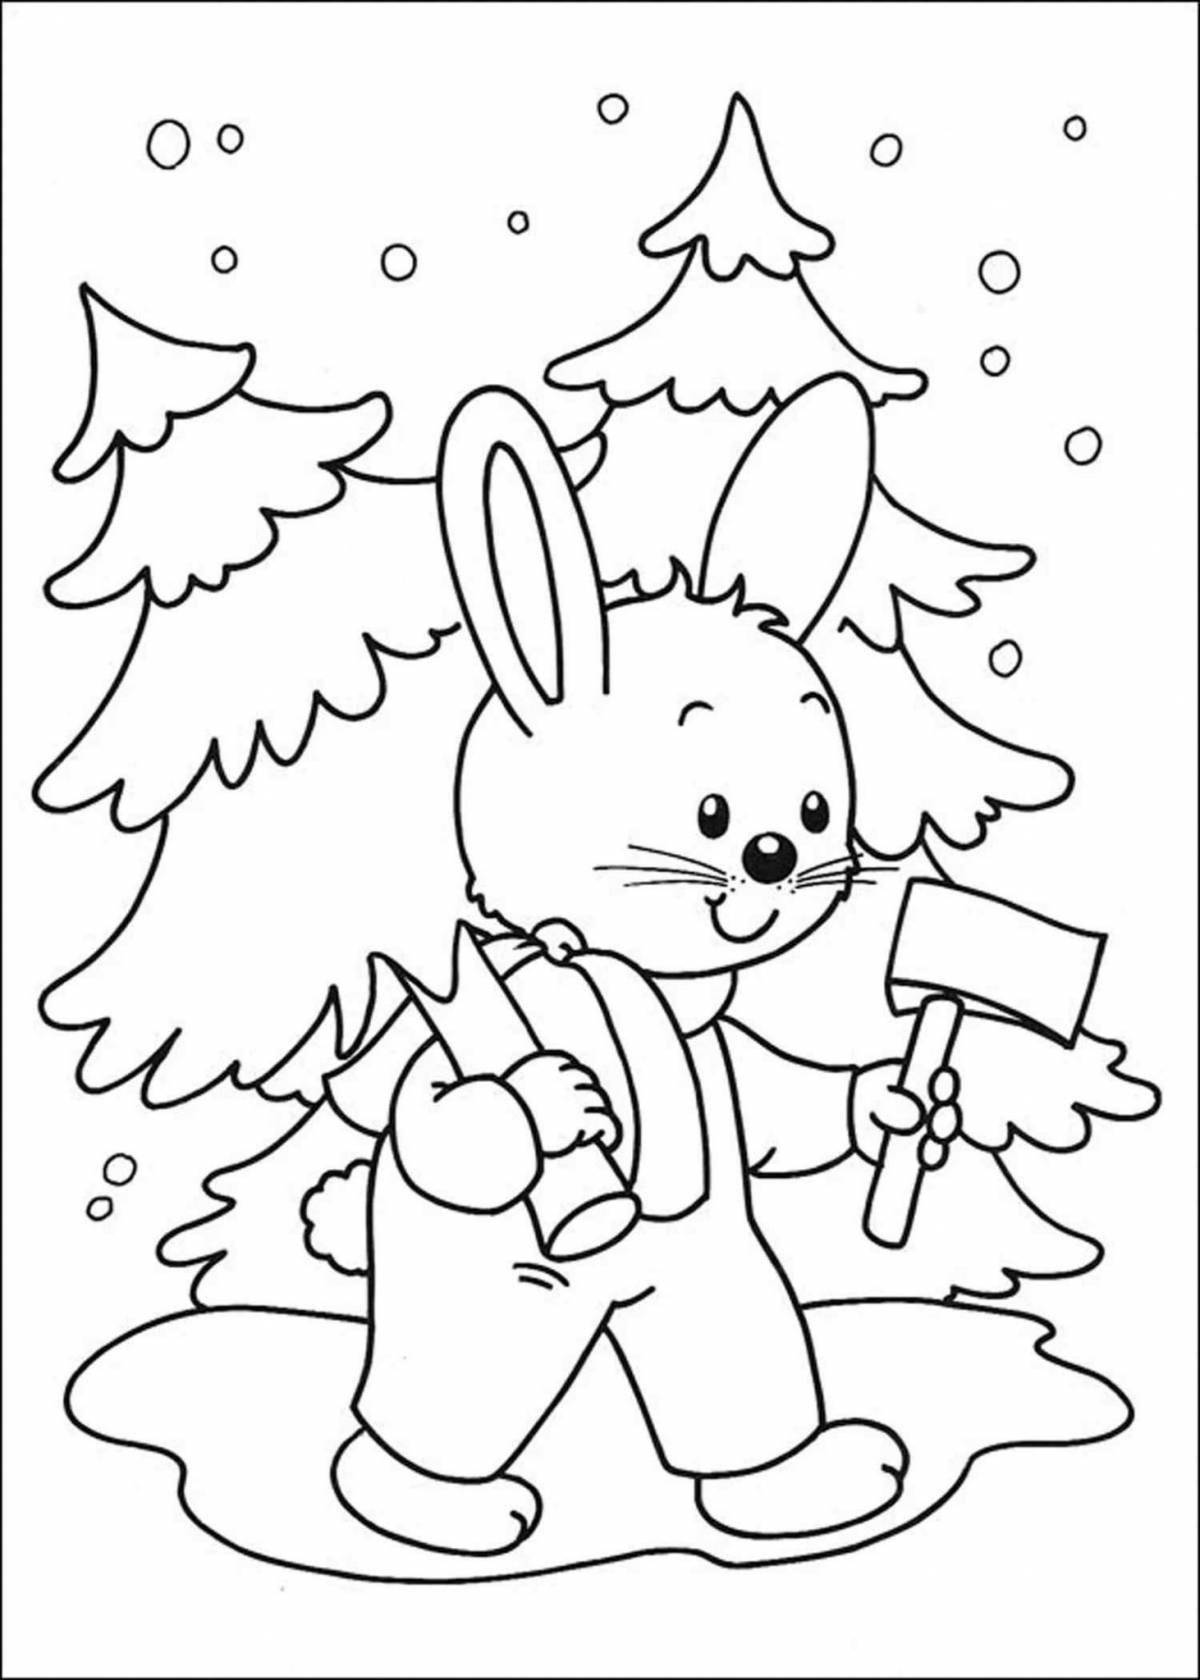 Festive Christmas coloring book for children 3-4 years old